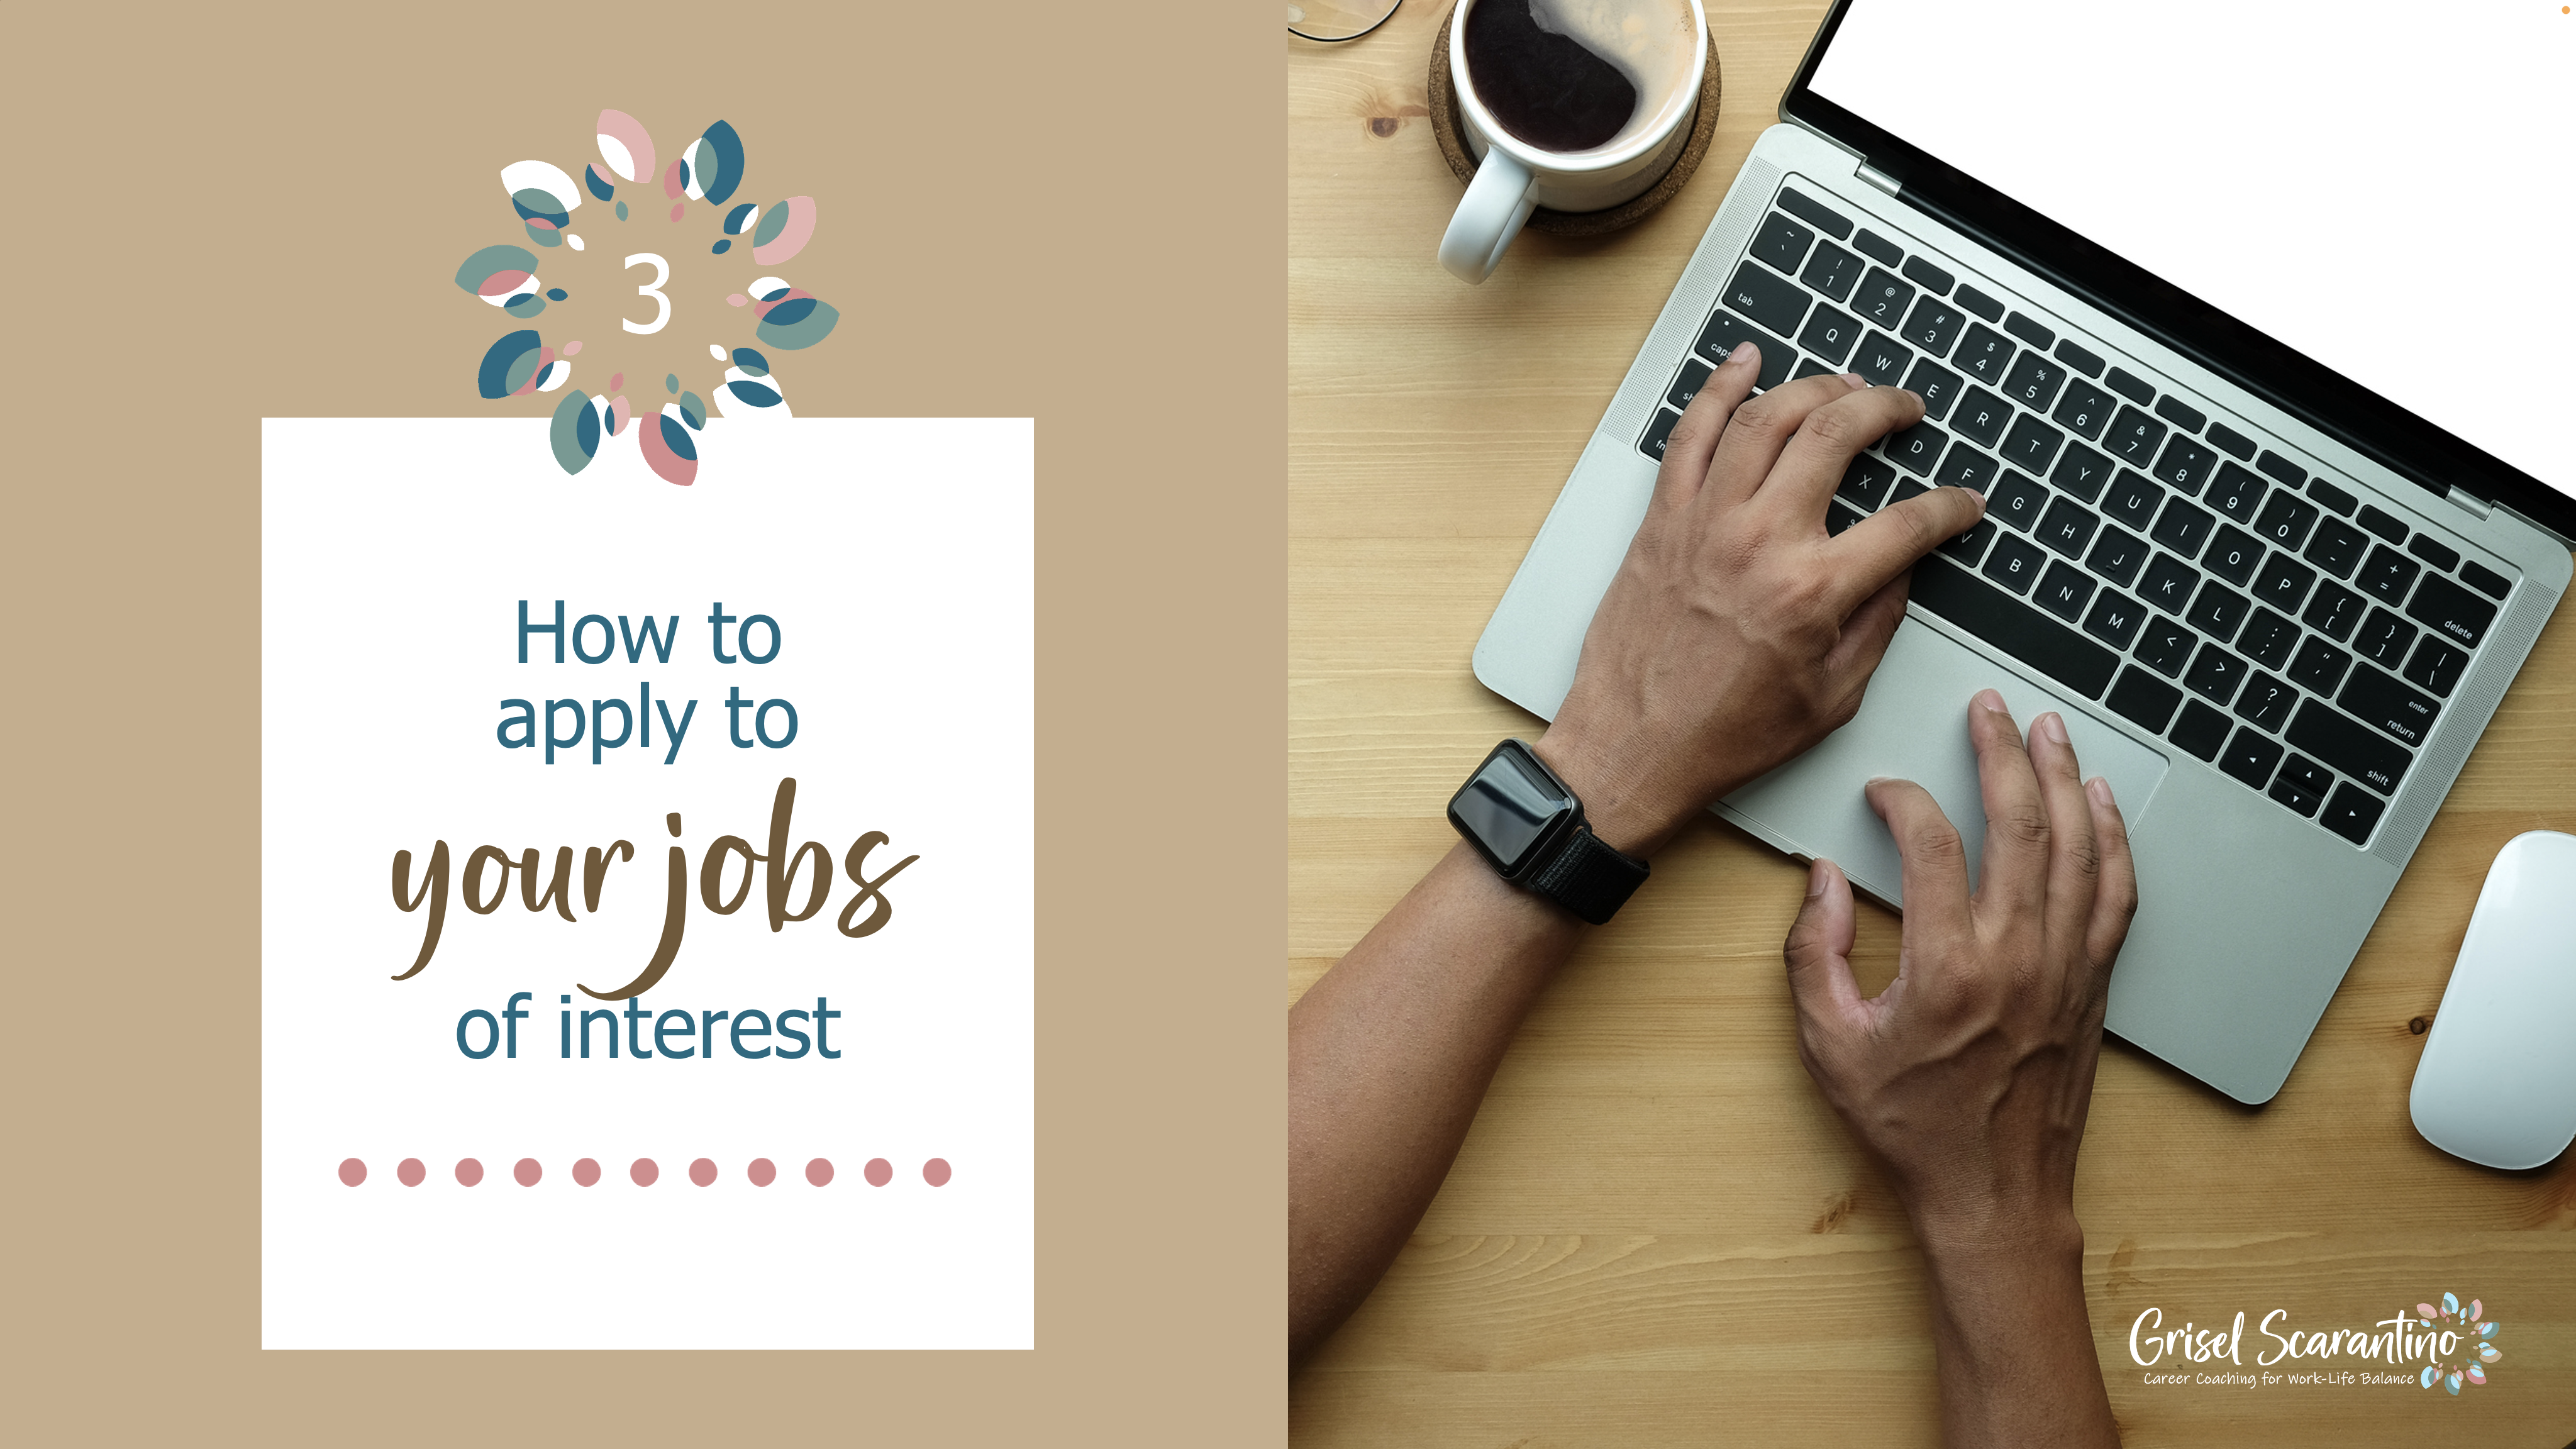 How to apply to your jobs of interest